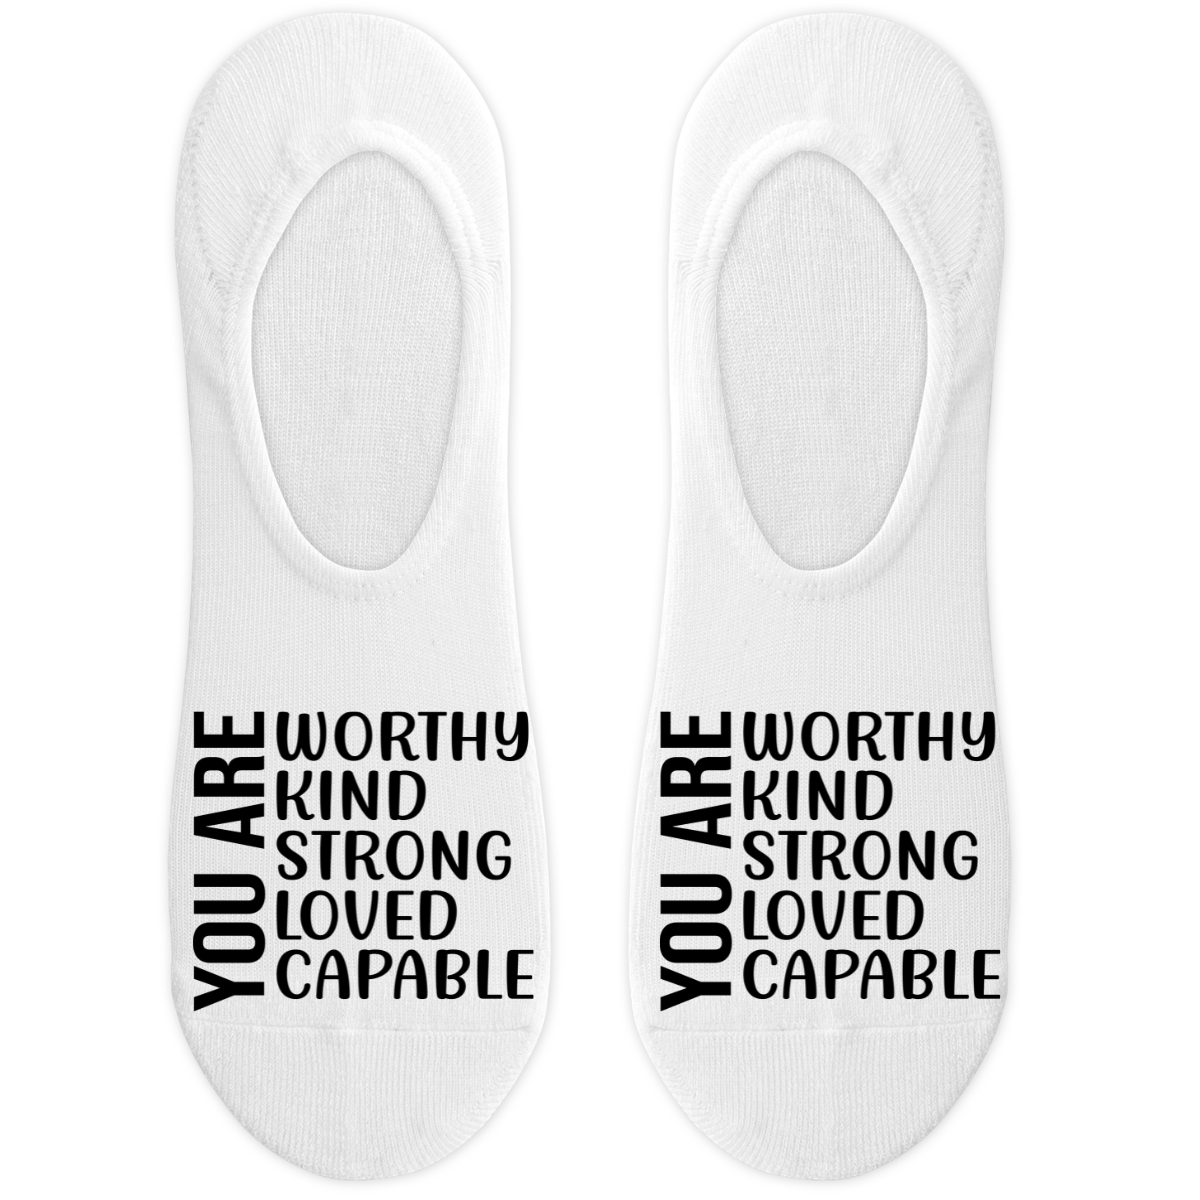 You Are Worthy Kind Strong Loved Capable Socks